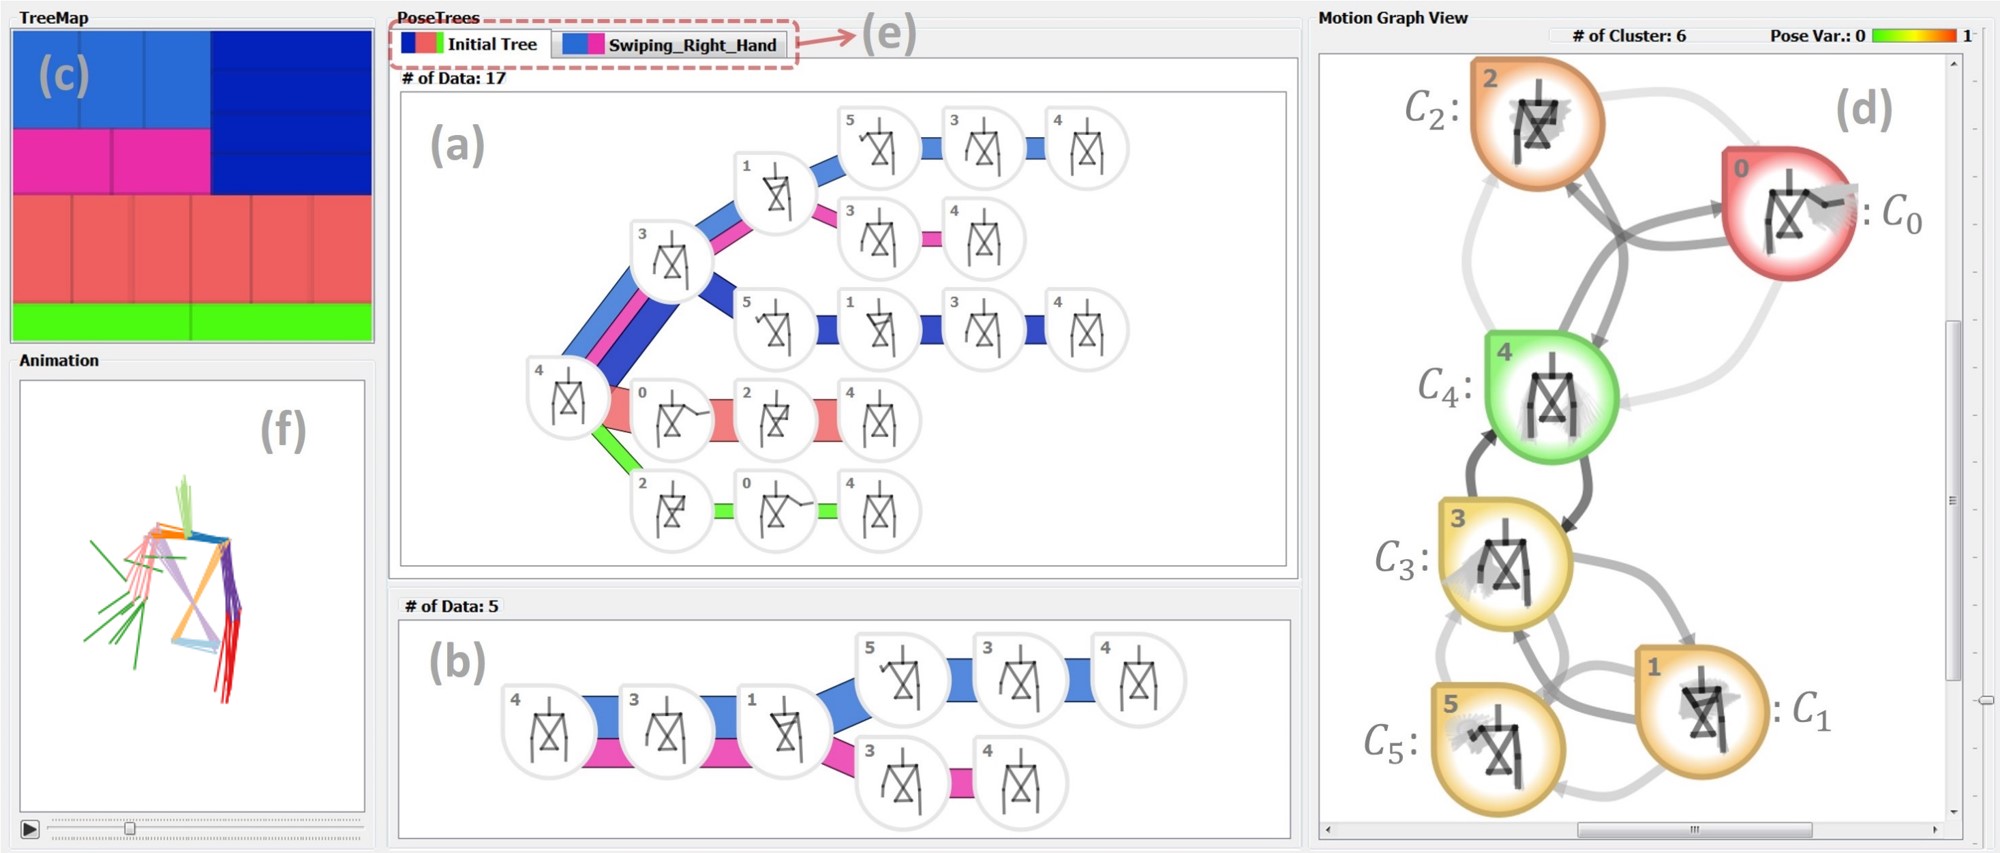 MotionFlow for pattern analysis of human motion data. (a) Pose tree: a simplified representation of multiple motion sequences aggregating the same transitions into a tree diagram. (b) A window dedicated to show a subtree structure based on a query. (c) Space-filling treemap representation of the motion sequence data using slice-and-dice layout. (d) Node-link diagram of pose clusters (nodes) and transitions (links) between them. This view supports interactive partition-based pose clustering. (e) Multi-tab interface for storing unique motion patterns. (f) Animations of single or multiple selected human motions.